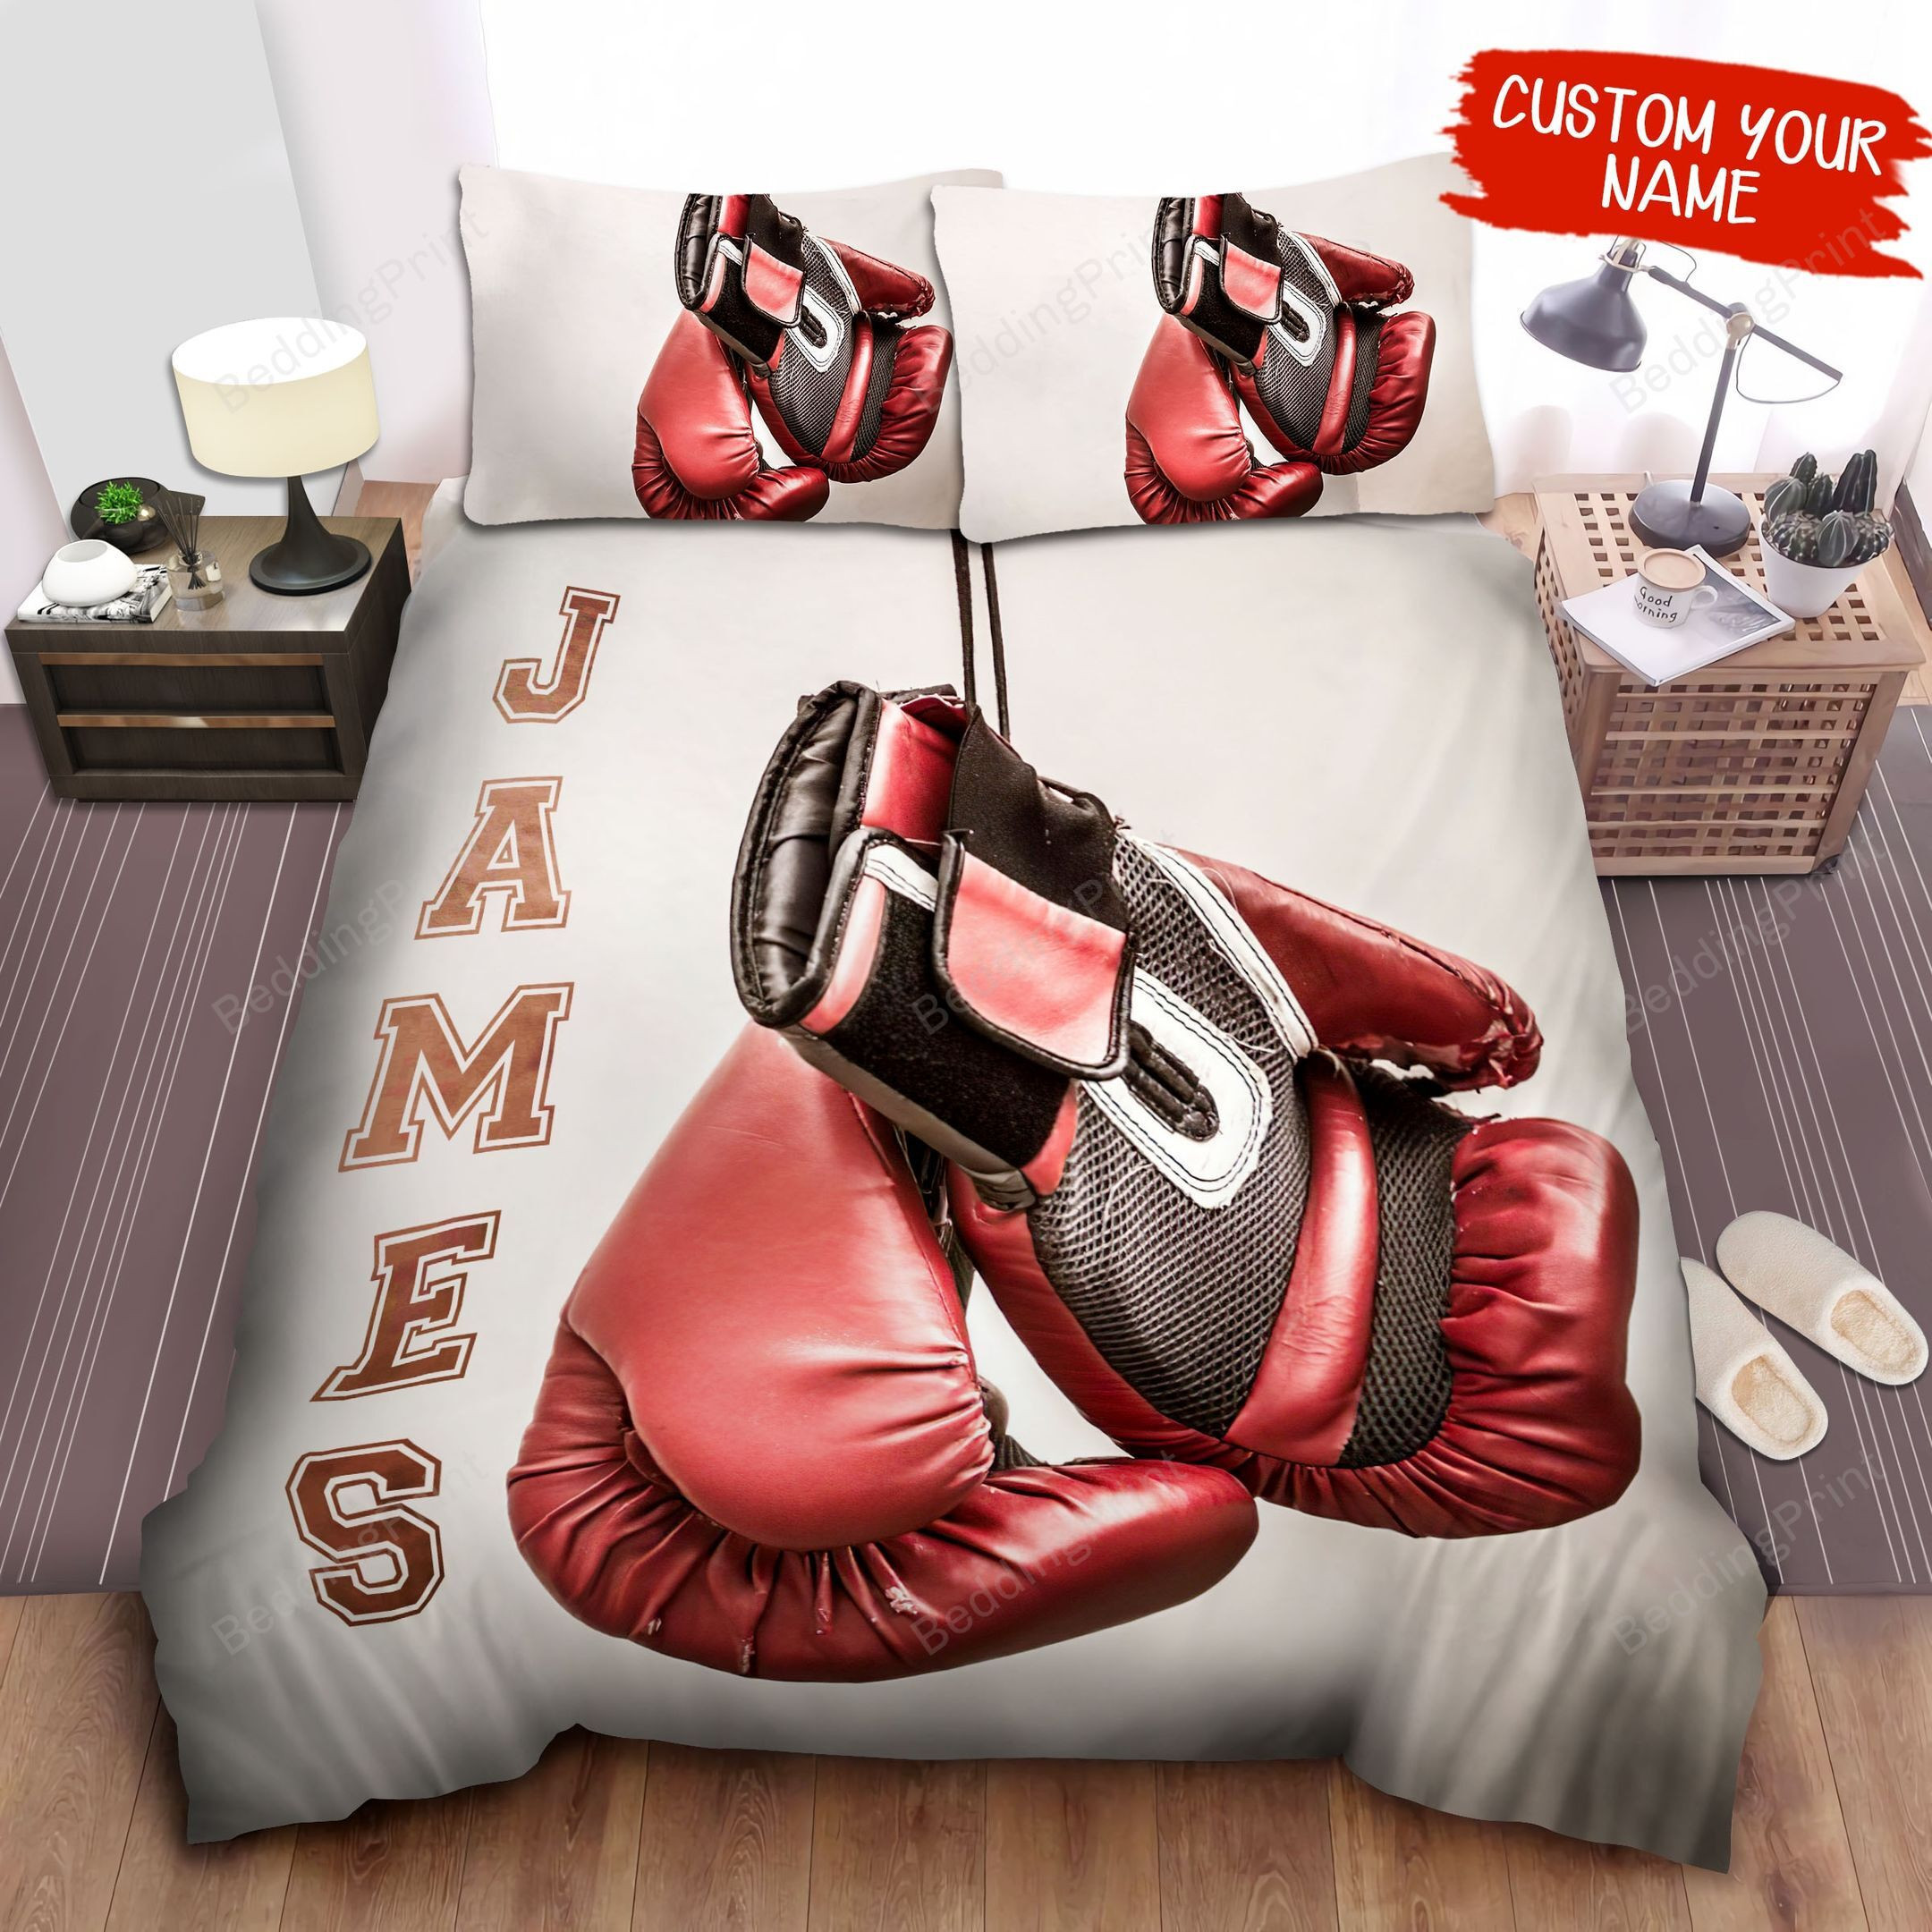 Personalized Boxing Gloves Photograph Bed Sheets Duvet Cover Bedding ...